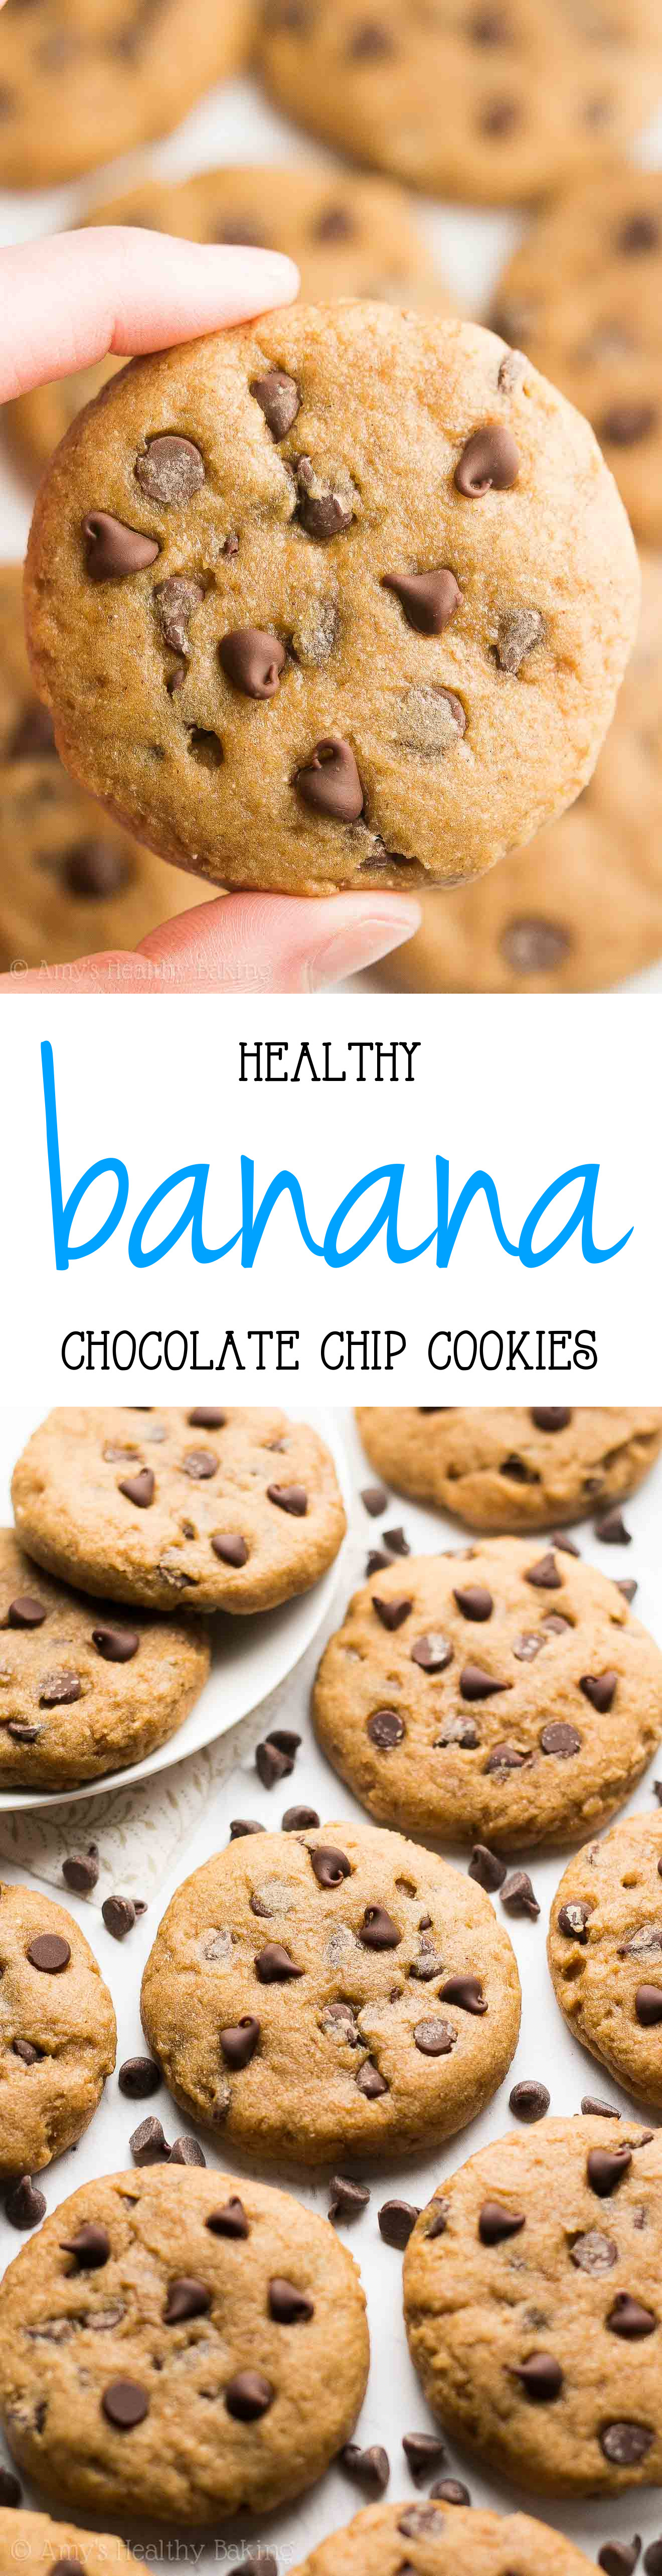 Healthy Whole Wheat Chocolate Chip Cookies
 whole wheat chocolate chip cookies calories